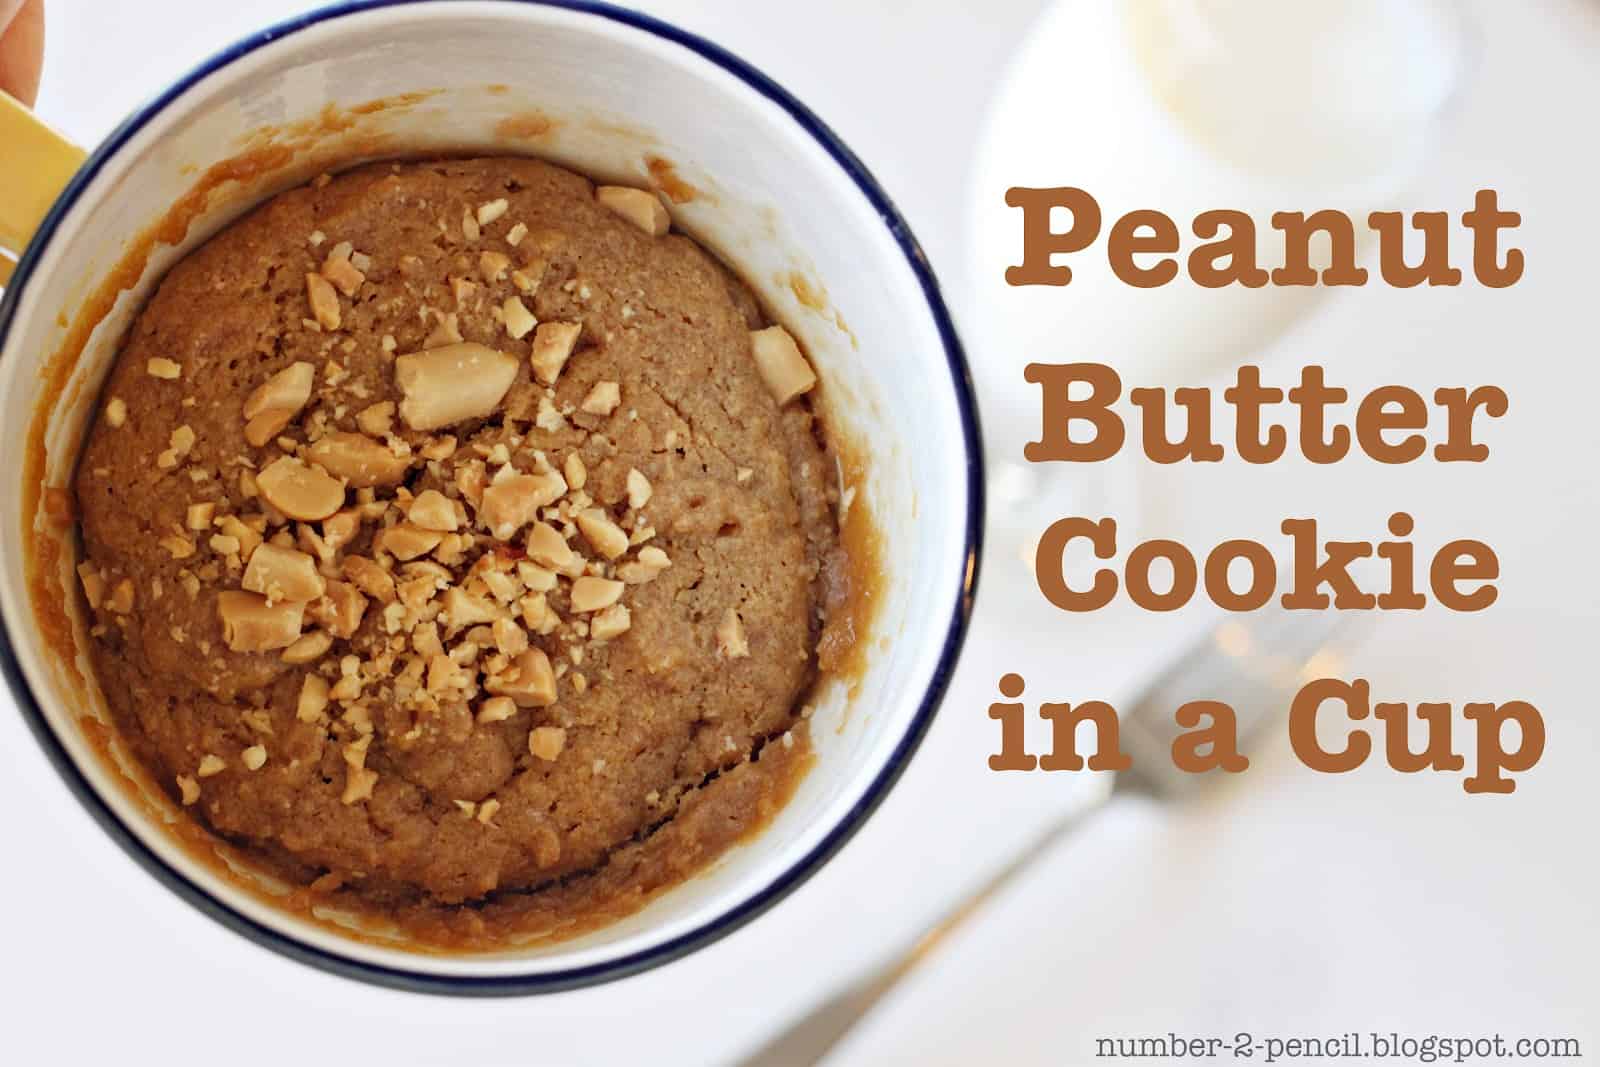 Peanut butter cookie in a cup